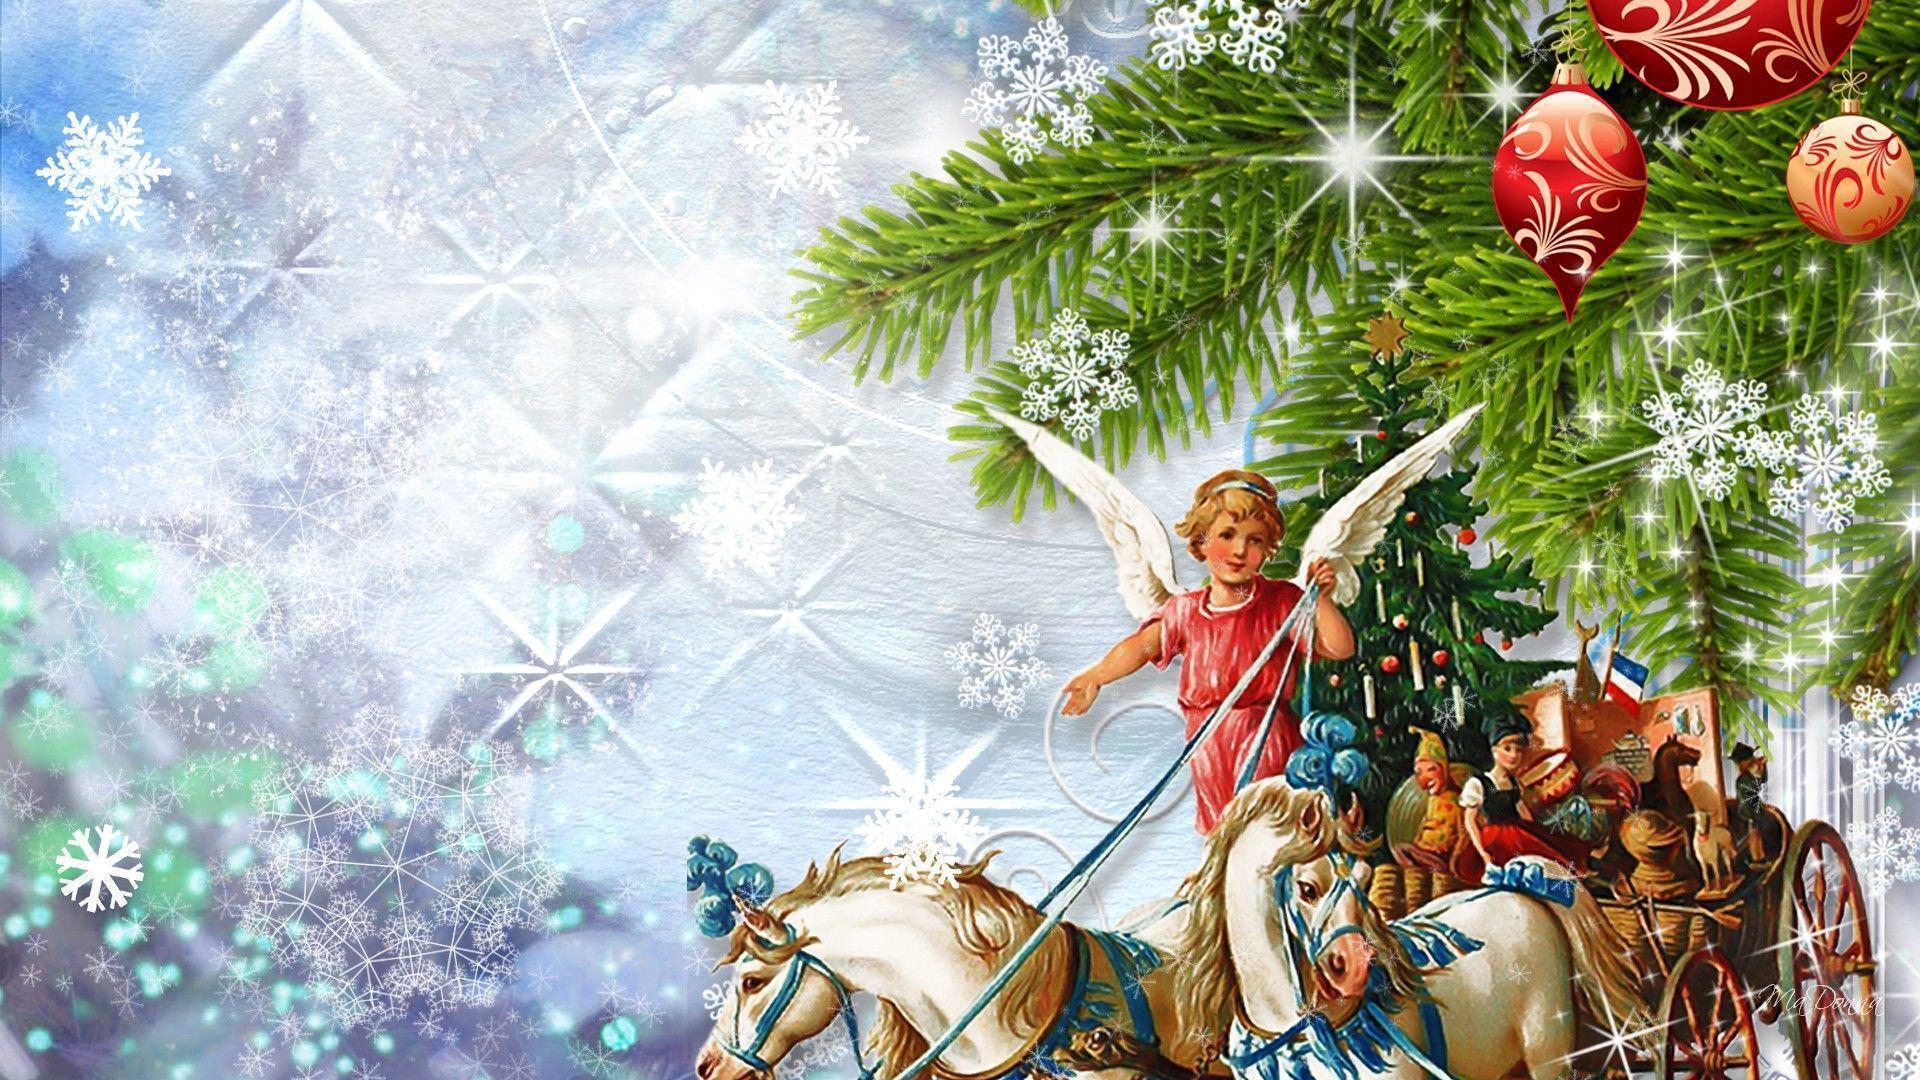 Christmas Nativity Angels Wallpapers